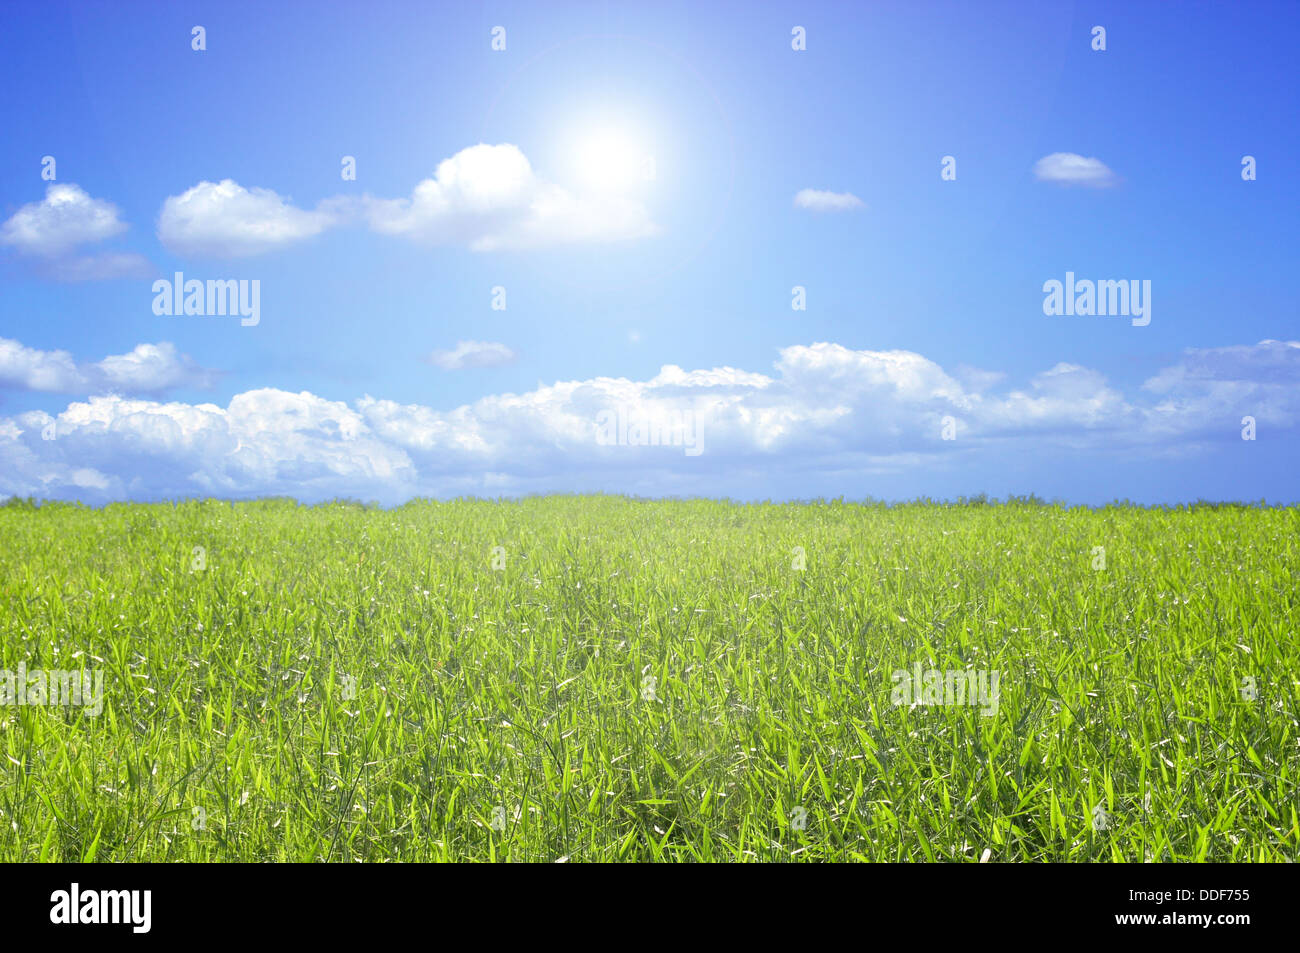 Beautiful green grass with a blue sky and the sun shining in the middle Stock Photo